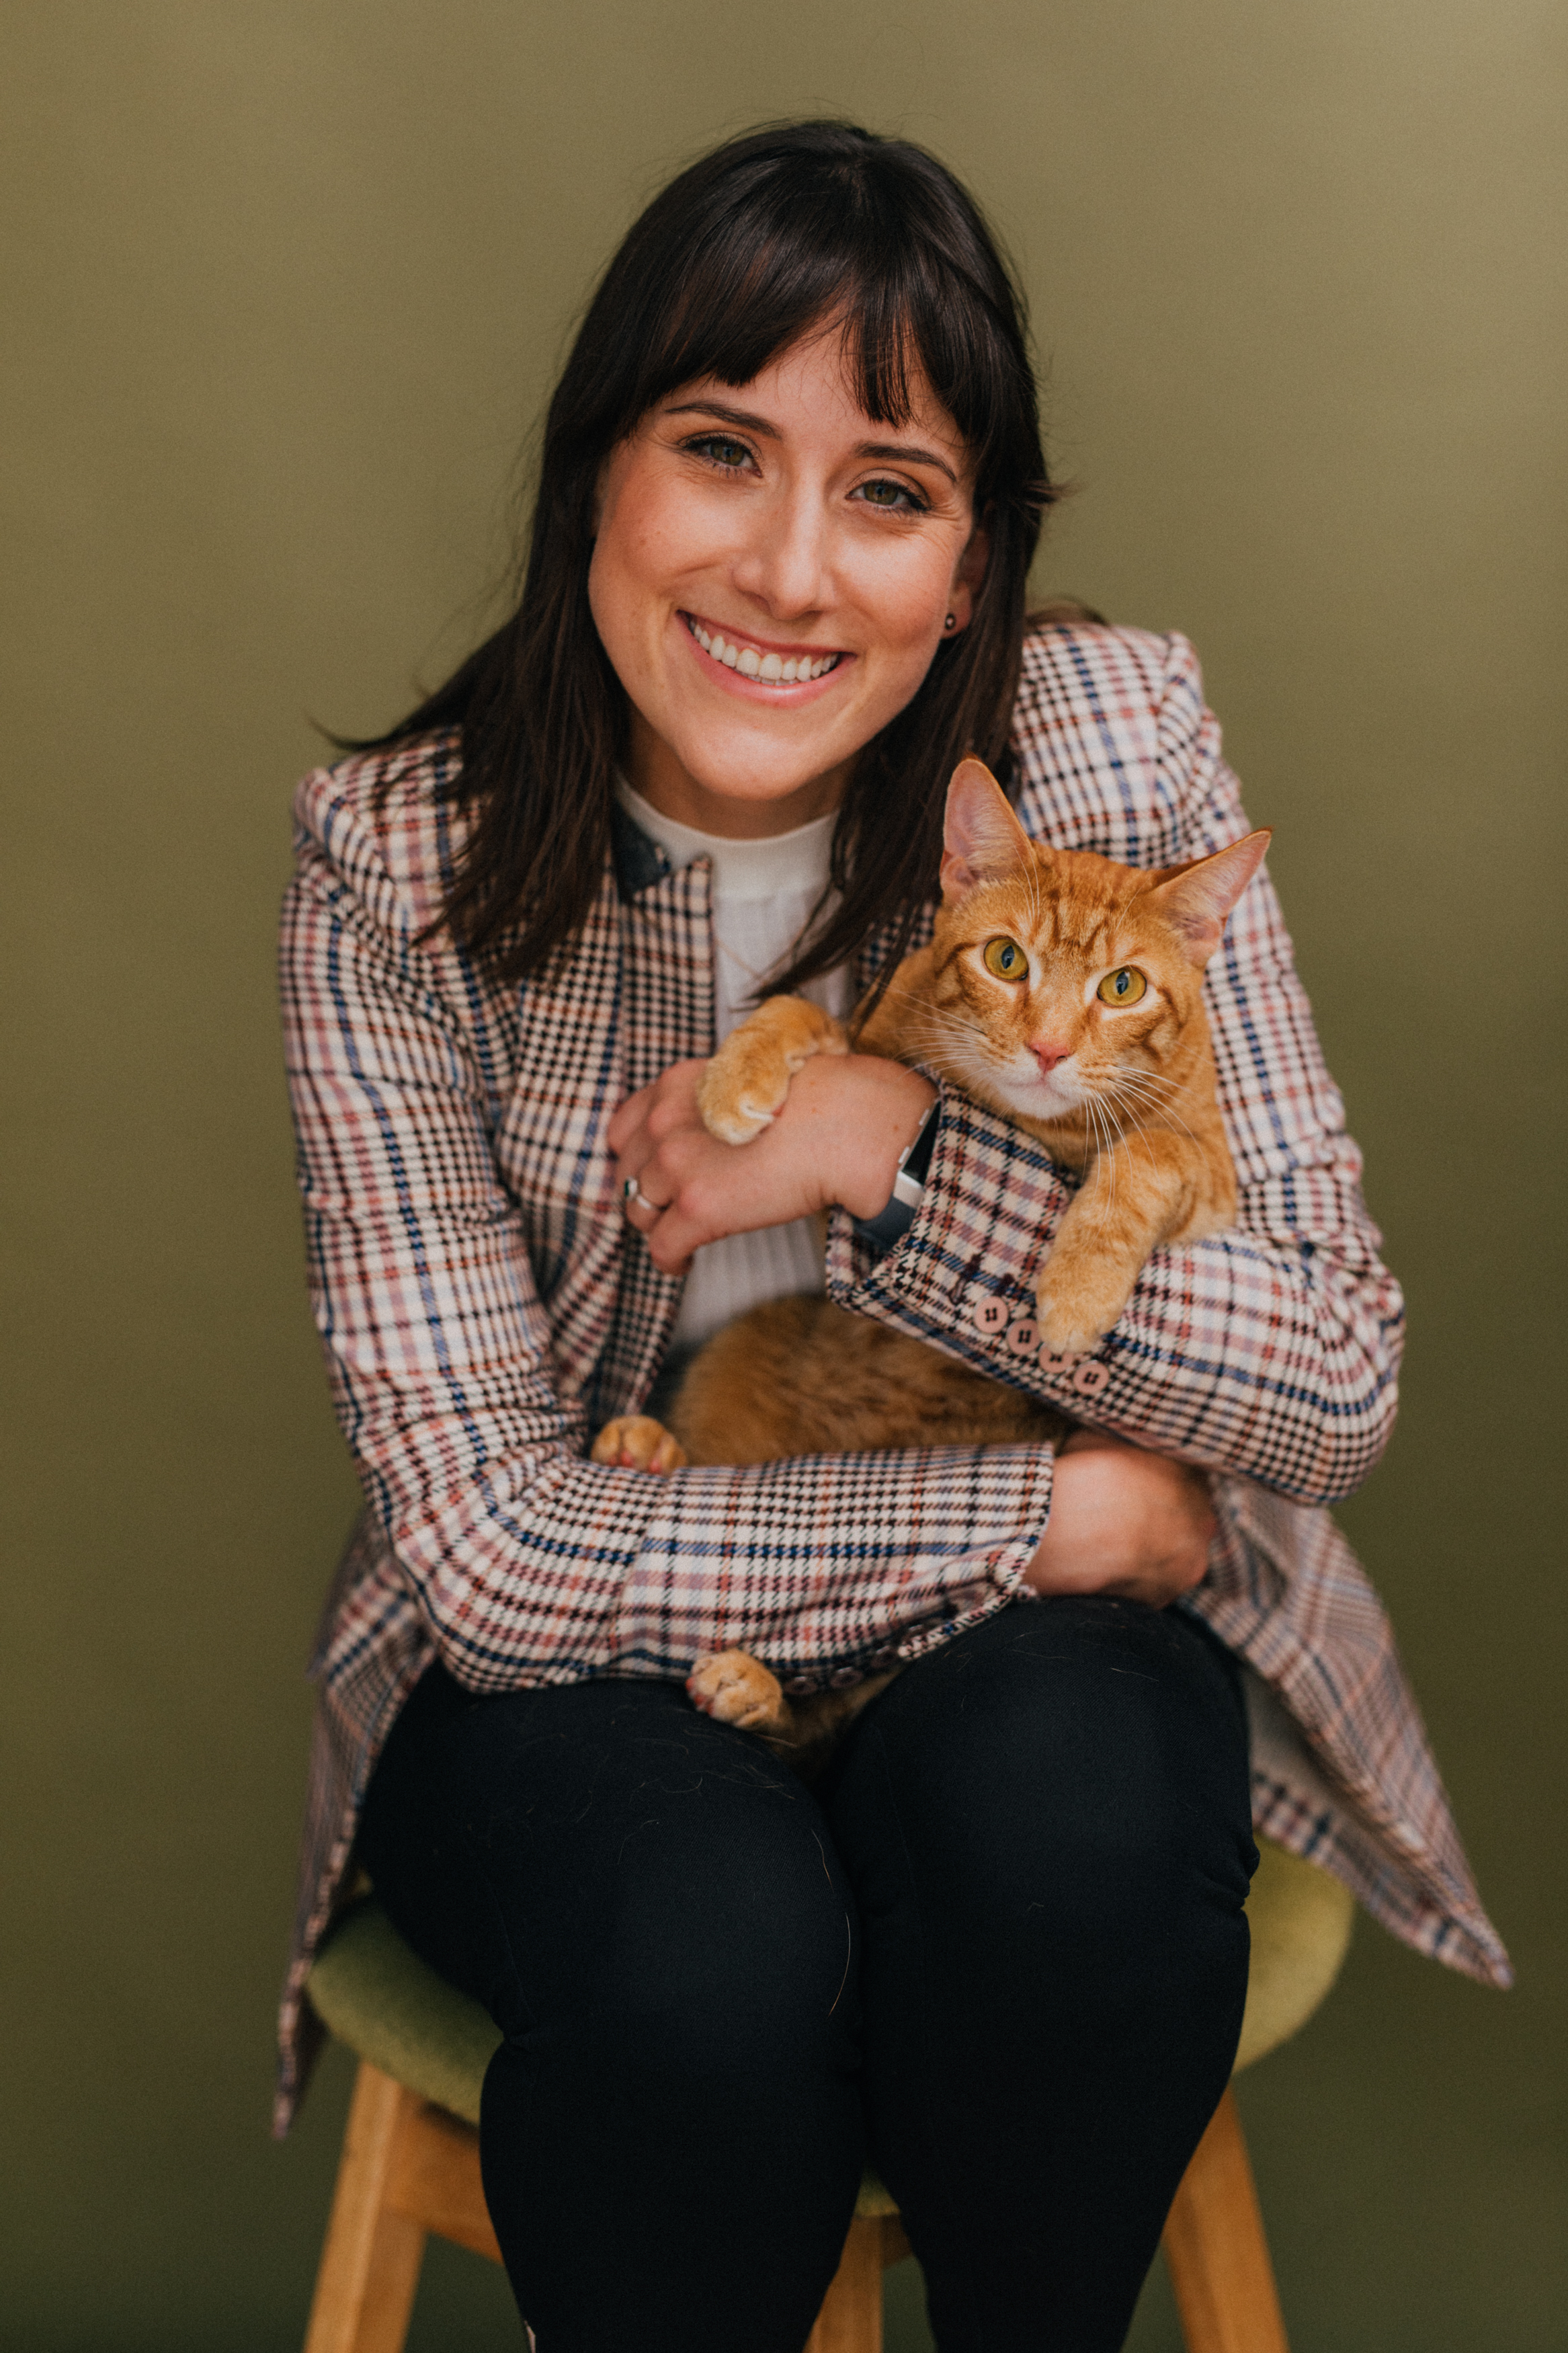 Jan24-Reeder-Walk your pet month-Dr Martha Cline and cat Charles_photo credit Ambe J. Williams.jpg